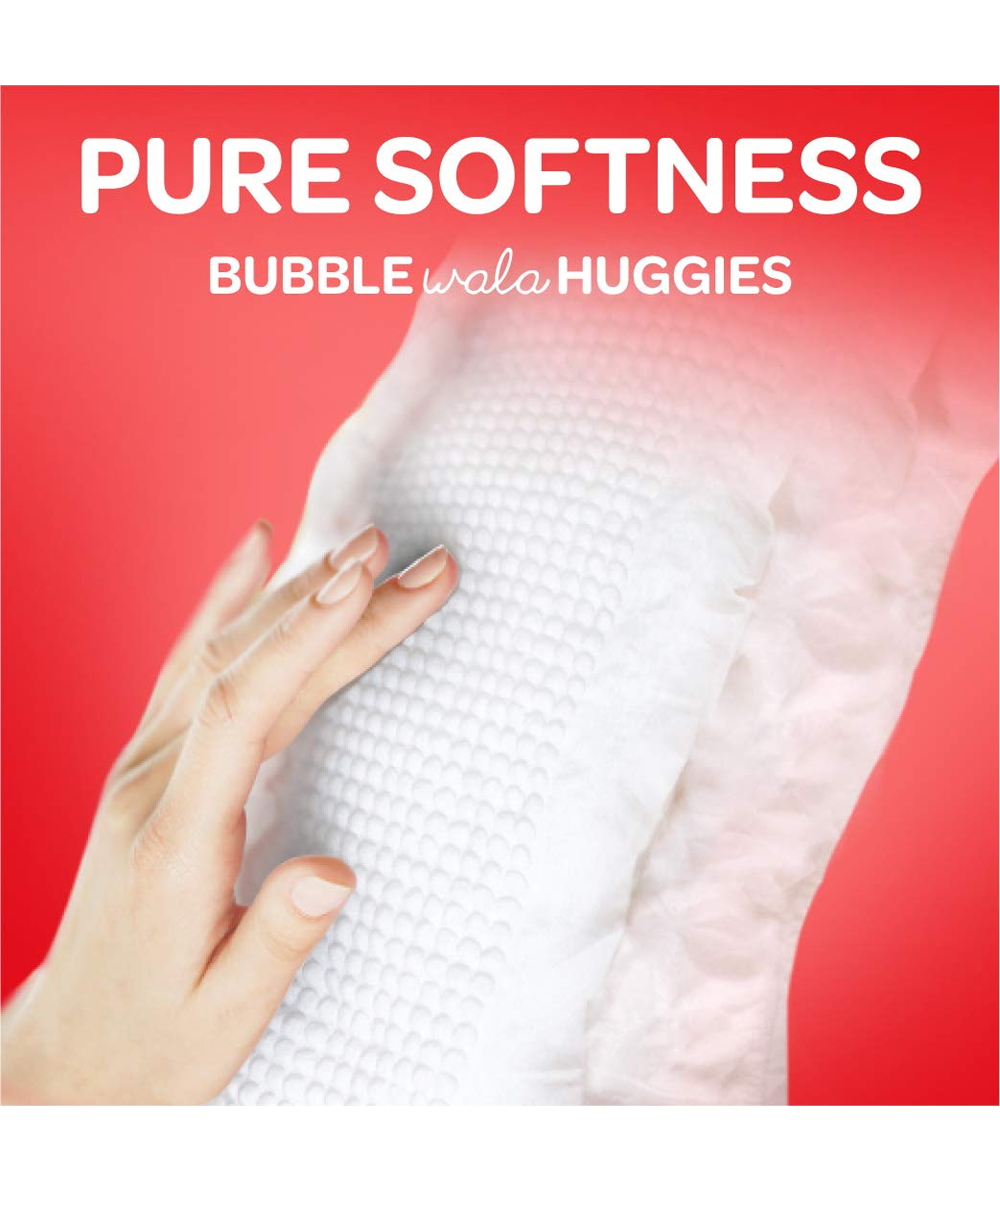 Buy Huggies Wonder Pants Diapers Sumo Pack Large L size baby diaper pants  with Bubble Bed Technology at Best Price from Mumpa - 290